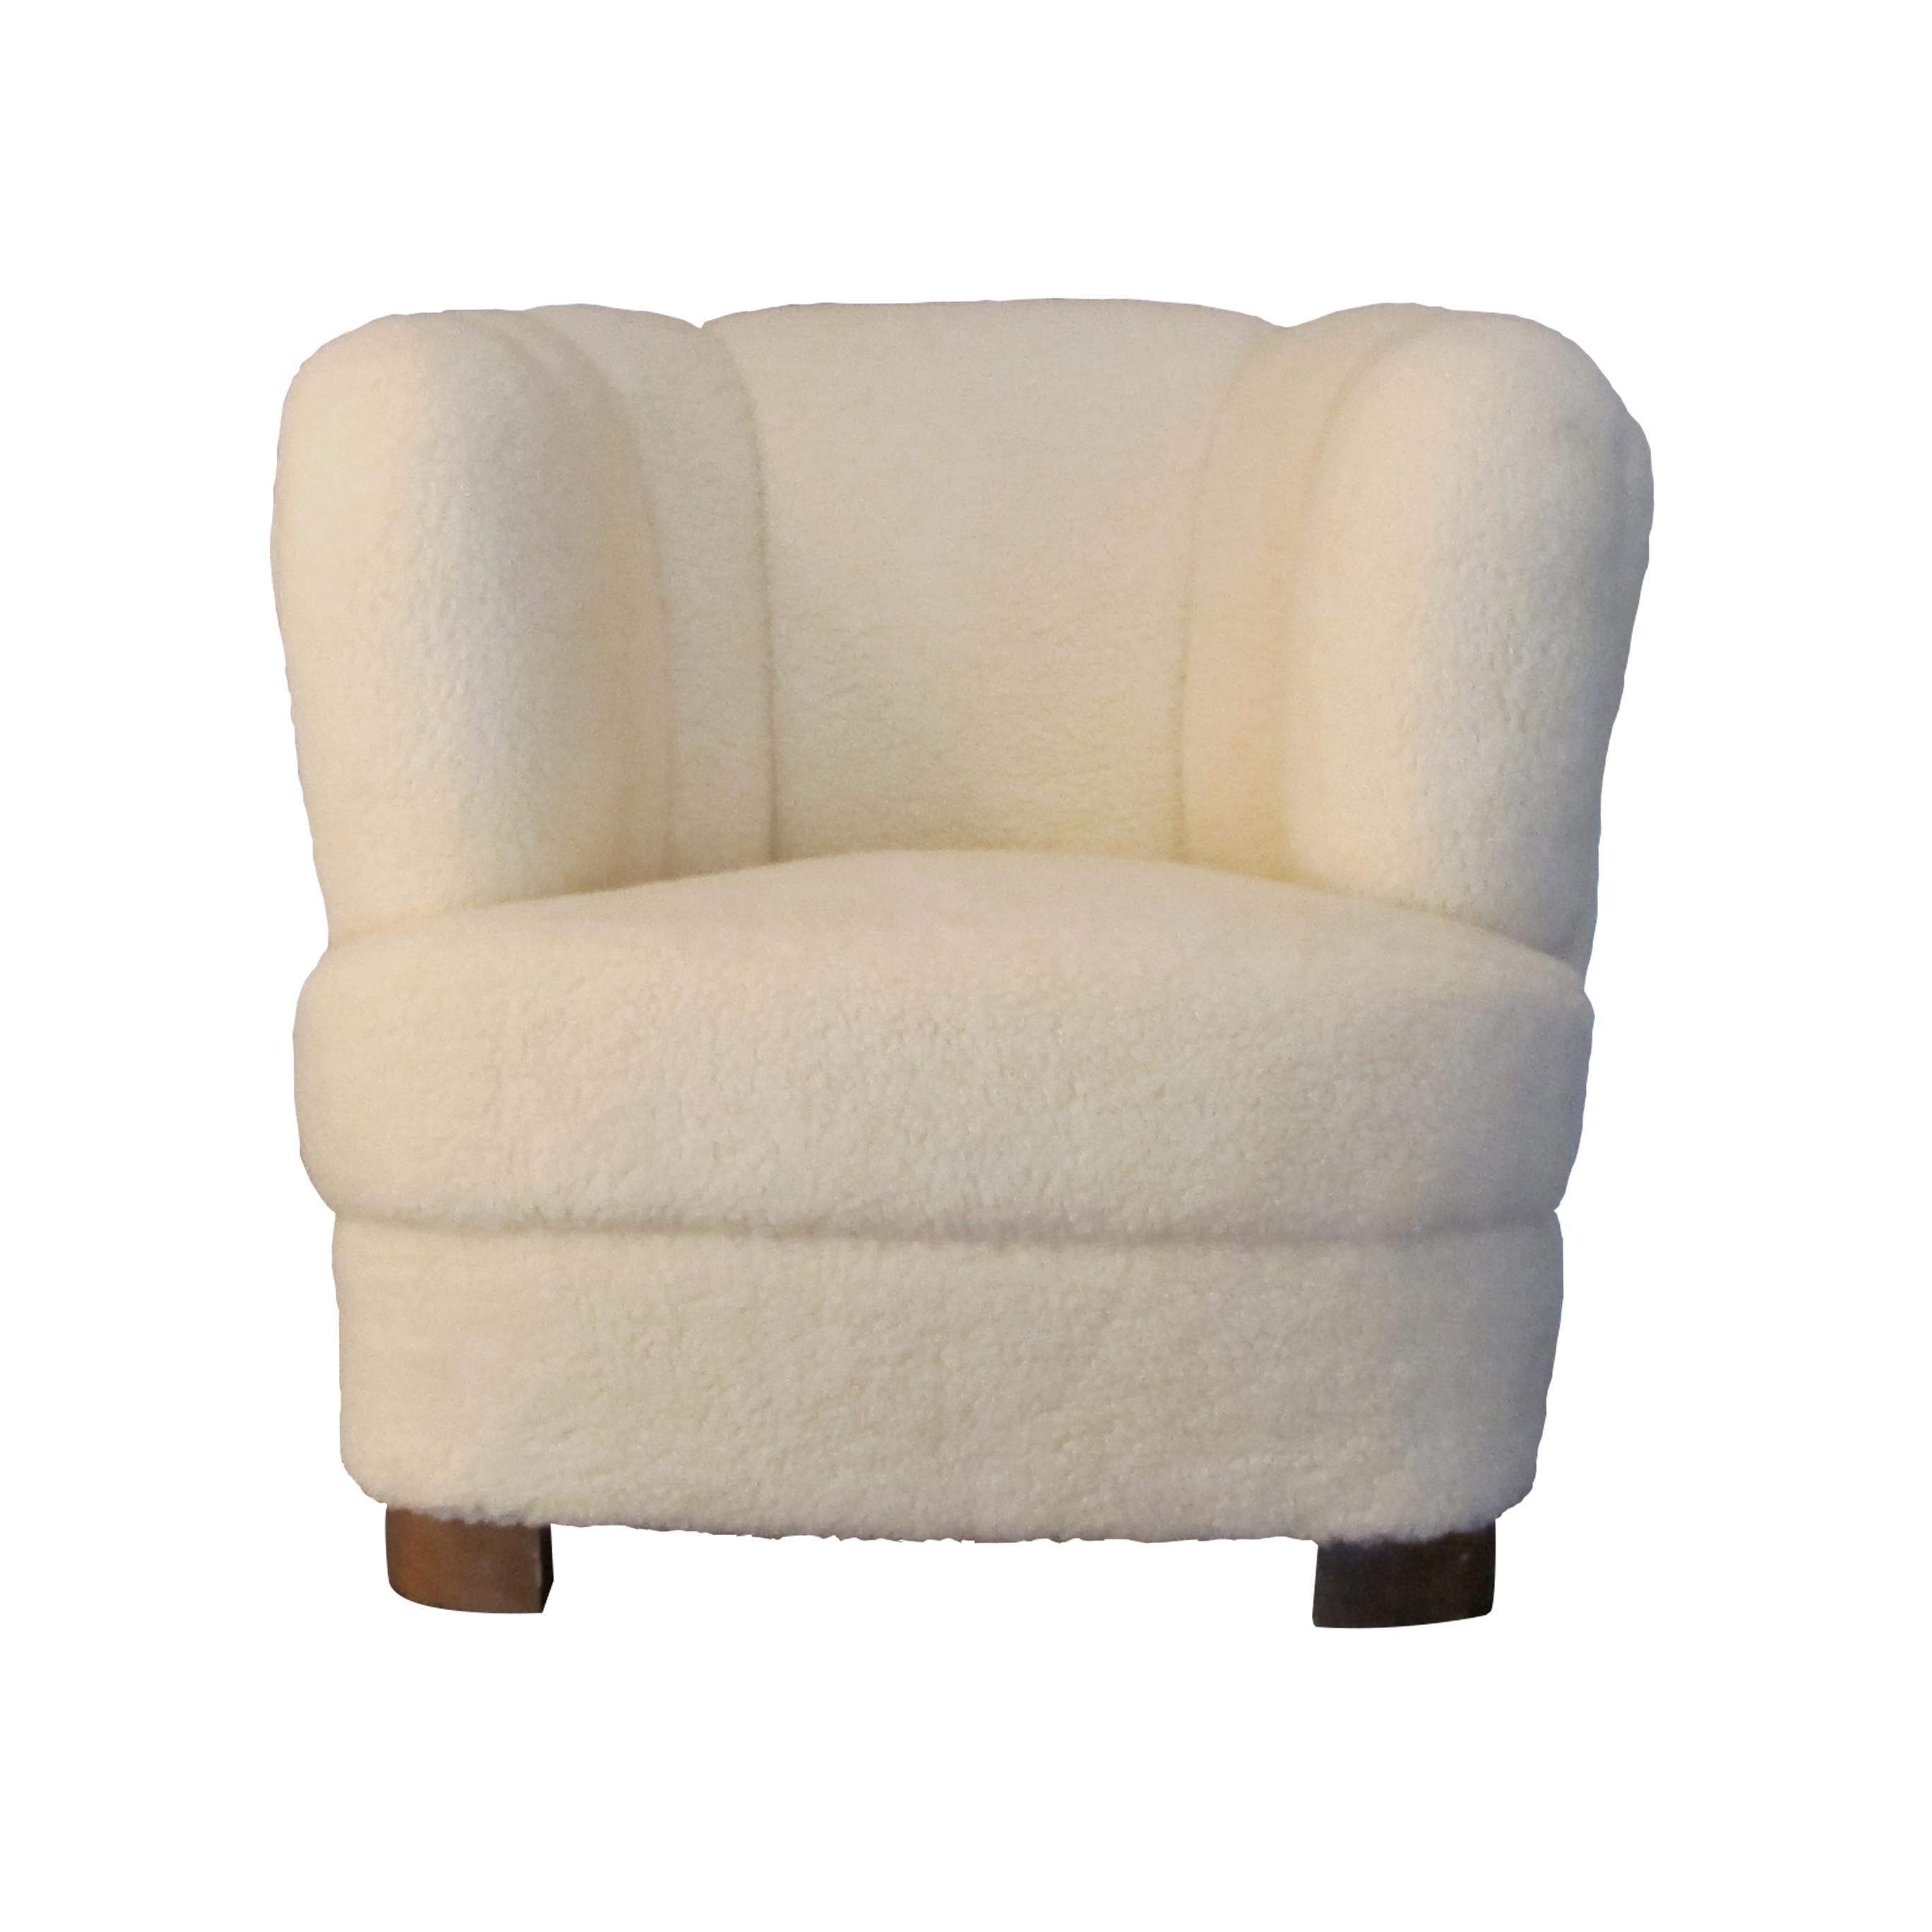 1930s Swedish single club armchair reupholstered in a lambskin fabric mix. The fabric is really soft and has a luxurious feel to it. This snug Art Deco armchair is well-padded and is very comfortable. The armchair would be a perfect addition in most